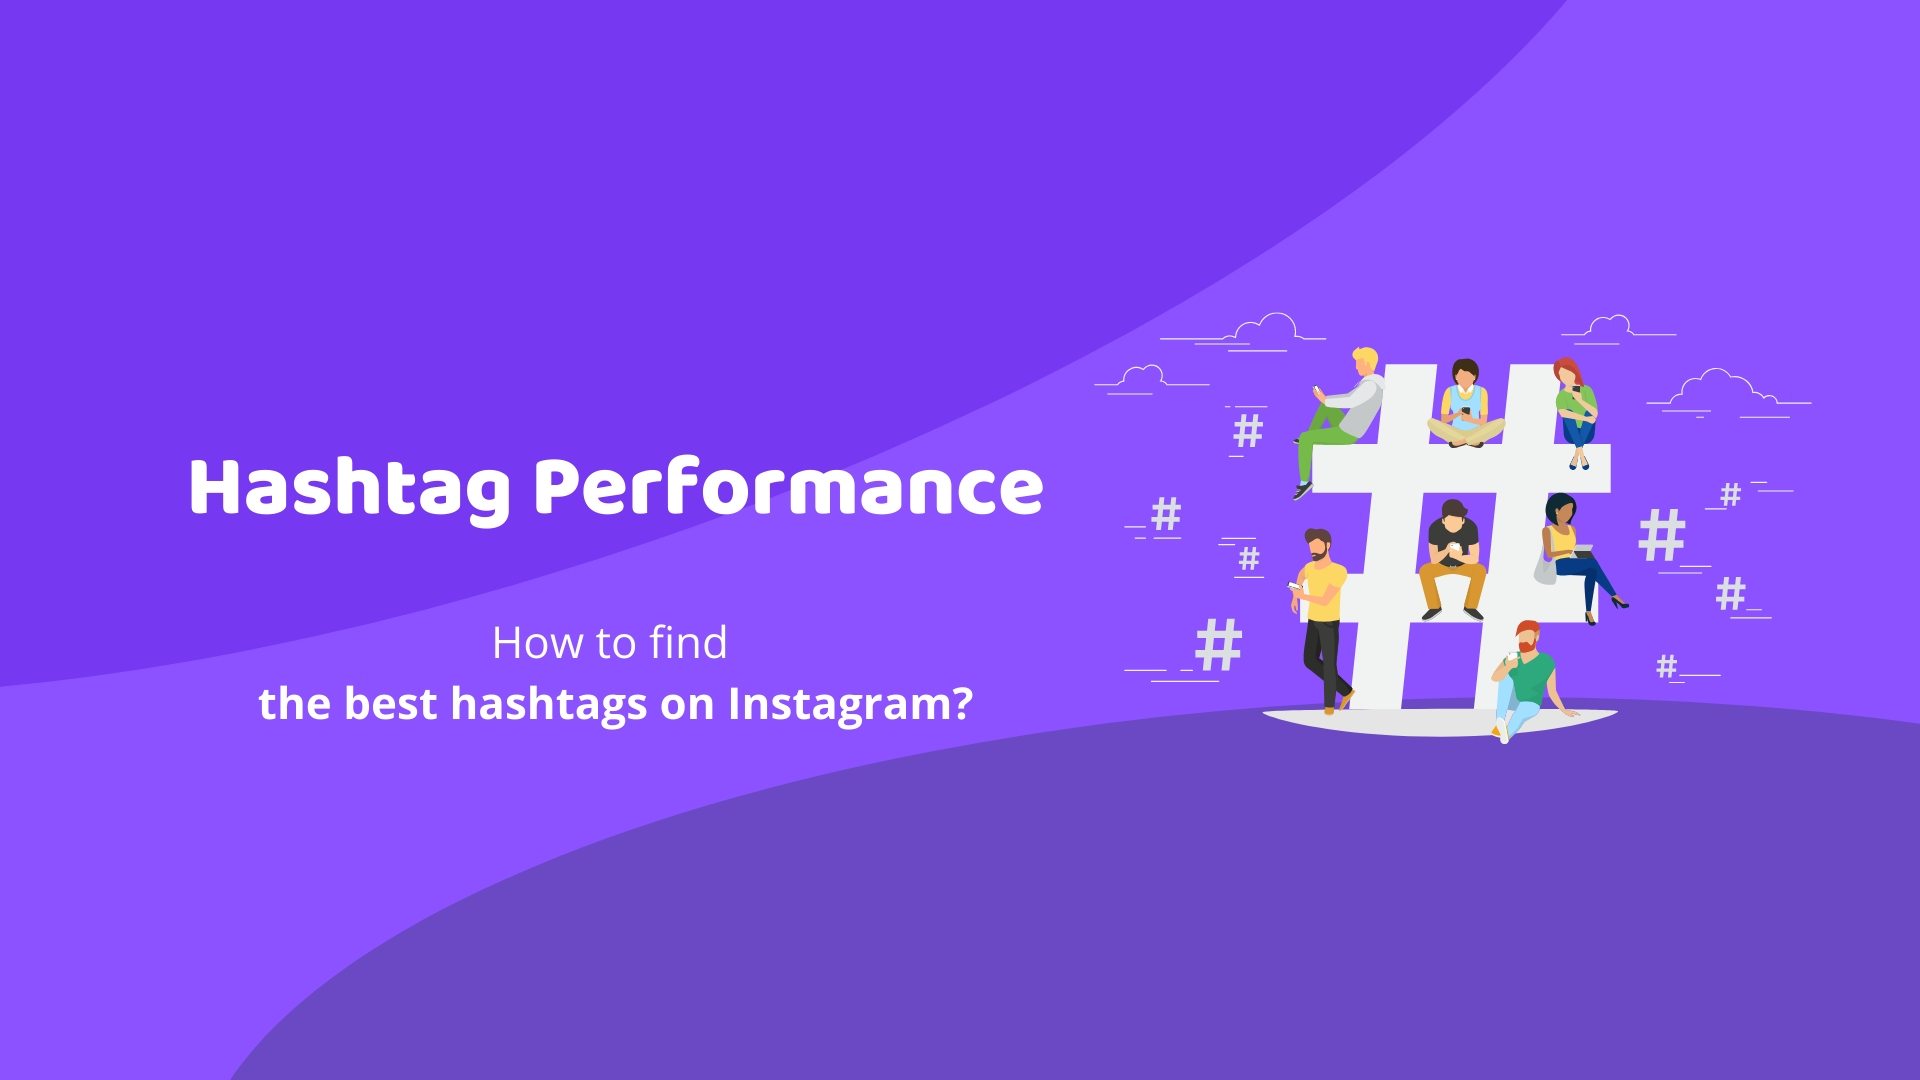 hashtag performance - how to find the best hashtags on instagram